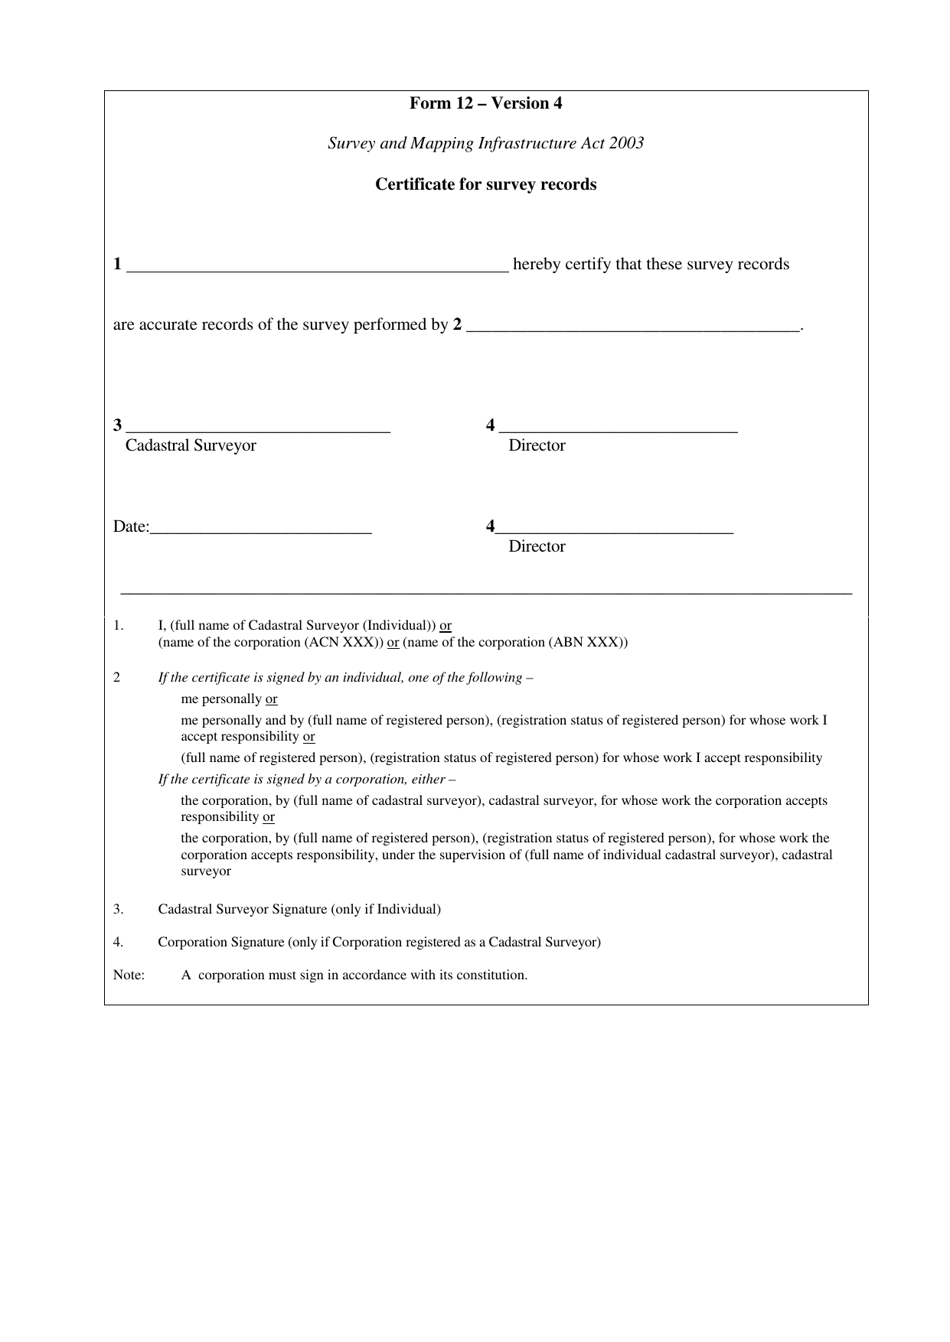 Form 12 Certificate for Survey Records - Queensland, Australia, Page 1